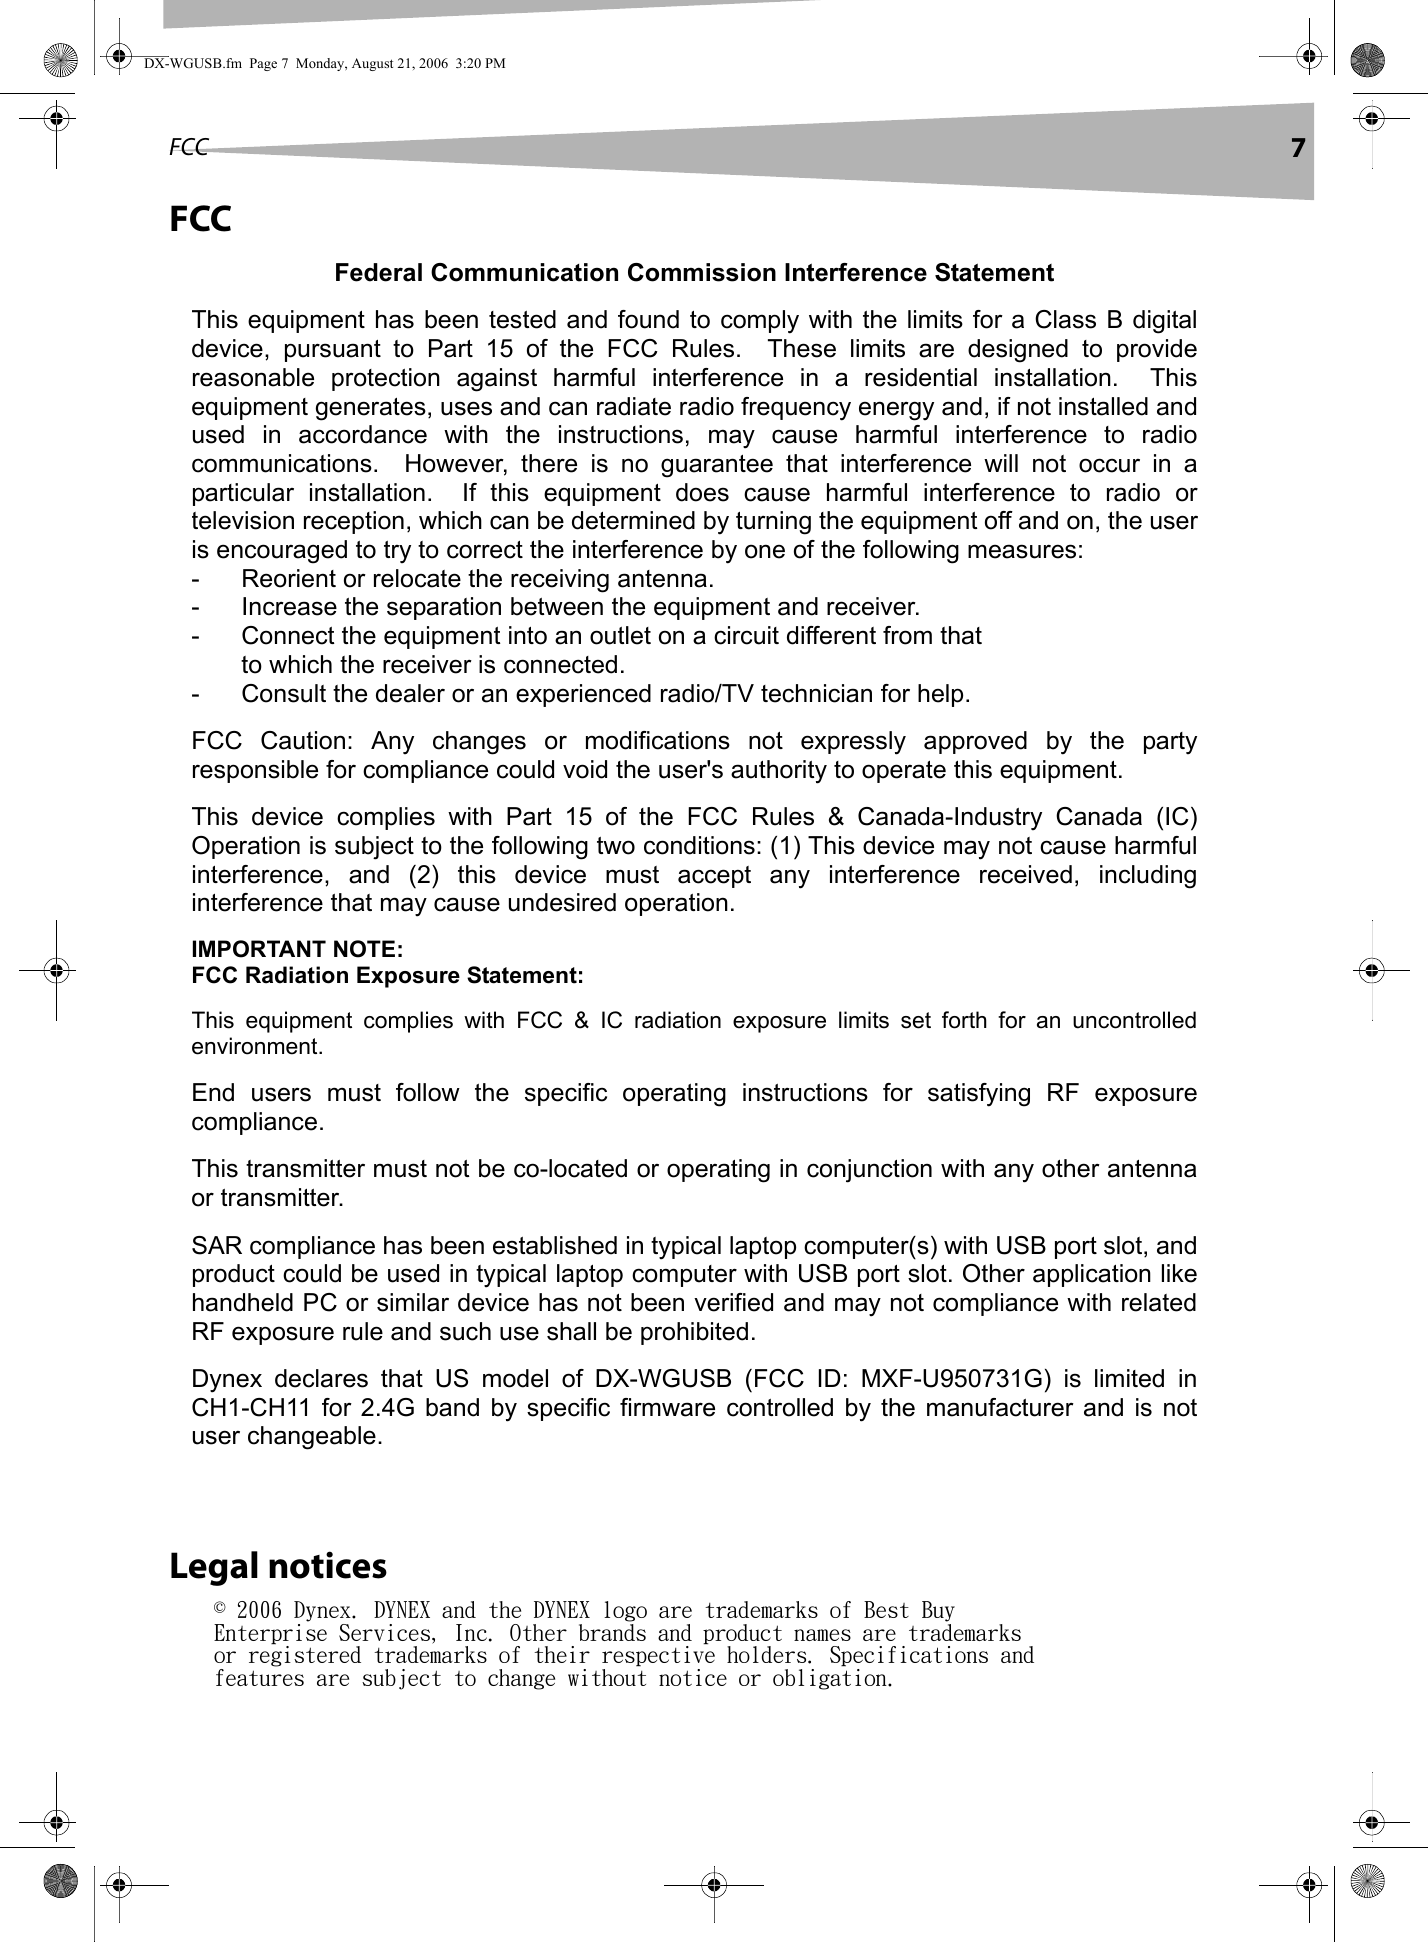 FCC 7FCCLegal notices© 2006 Dynex. DYNEX and the DYNEX logo are trademarks of Best Buy Enterprise Services, Inc. Other brands and product names are trademarks or registered trademarks of their respective holders. Specifications and features are subject to change without notice or obligation.DX-WGUSB.fm  Page 7  Monday, August 21, 2006  3:20 PMFederal Communication Commission Interference Statement This equipment has been tested and found to comply with the limits for a Class B digital device,  pursuant  to  Part  15  of  the  FCC  Rules.    These  limits  are  designed  to  provide reasonable  protection  against  harmful  interference  in  a  residential  installation.    This equipment generates, uses and can radiate radio frequency energy and, if not installed and used  in  accordance  with  the  instructions,  may  cause  harmful  interference  to  radio communications.    However,  there  is  no  guarantee  that  interference  will  not  occur  in  a particular  installation.    If  this  equipment  does  cause  harmful  interference  to  radio  or television reception, which can be determined by turning the equipment off and on, the user is encouraged to try to correct the interference by one of the following measures: -  Reorient or relocate the receiving antenna. -  Increase the separation between the equipment and receiver. -  Connect the equipment into an outlet on a circuit different from that to which the receiver is connected. -  Consult the dealer or an experienced radio/TV technician for help. FCC  Caution:  Any  changes  or  modifications  not  expressly  approved  by  the  party responsible for compliance could void the user&apos;s authority to operate this equipment. This  device  complies  with  Part  15  of  the  FCC  Rules  &amp;  Canada-Industry  Canada  (IC) Operation is subject to the following two conditions: (1) This device may not cause harmful interference,  and  (2)  this  device  must  accept  any  interference  received,  including interference that may cause undesired operation. IMPORTANT NOTE: FCC Radiation Exposure Statement: This  equipment  complies  with  FCC  &amp;  IC  radiation  exposure  limits  set  forth  for  an  uncontrolled environment.   End  users  must  follow  the  specific  operating  instructions  for  satisfying  RF  exposure compliance. This transmitter must not be co-located or operating in conjunction with any other antenna or transmitter. SAR compliance has been established in typical laptop computer(s) with USB port slot, and product could be used in typical laptop computer with USB port slot. Other application like handheld PC or similar device has not been verified and may not compliance with related RF exposure rule and such use shall be prohibited. Dynex  declares  that  US  model  of  DX-WGUSB  (FCC  ID:  MXF-U950731G)  is  limited  in CH1-CH11  for 2.4G band by  specific firmware  controlled  by  the  manufacturer  and  is not user changeable.  